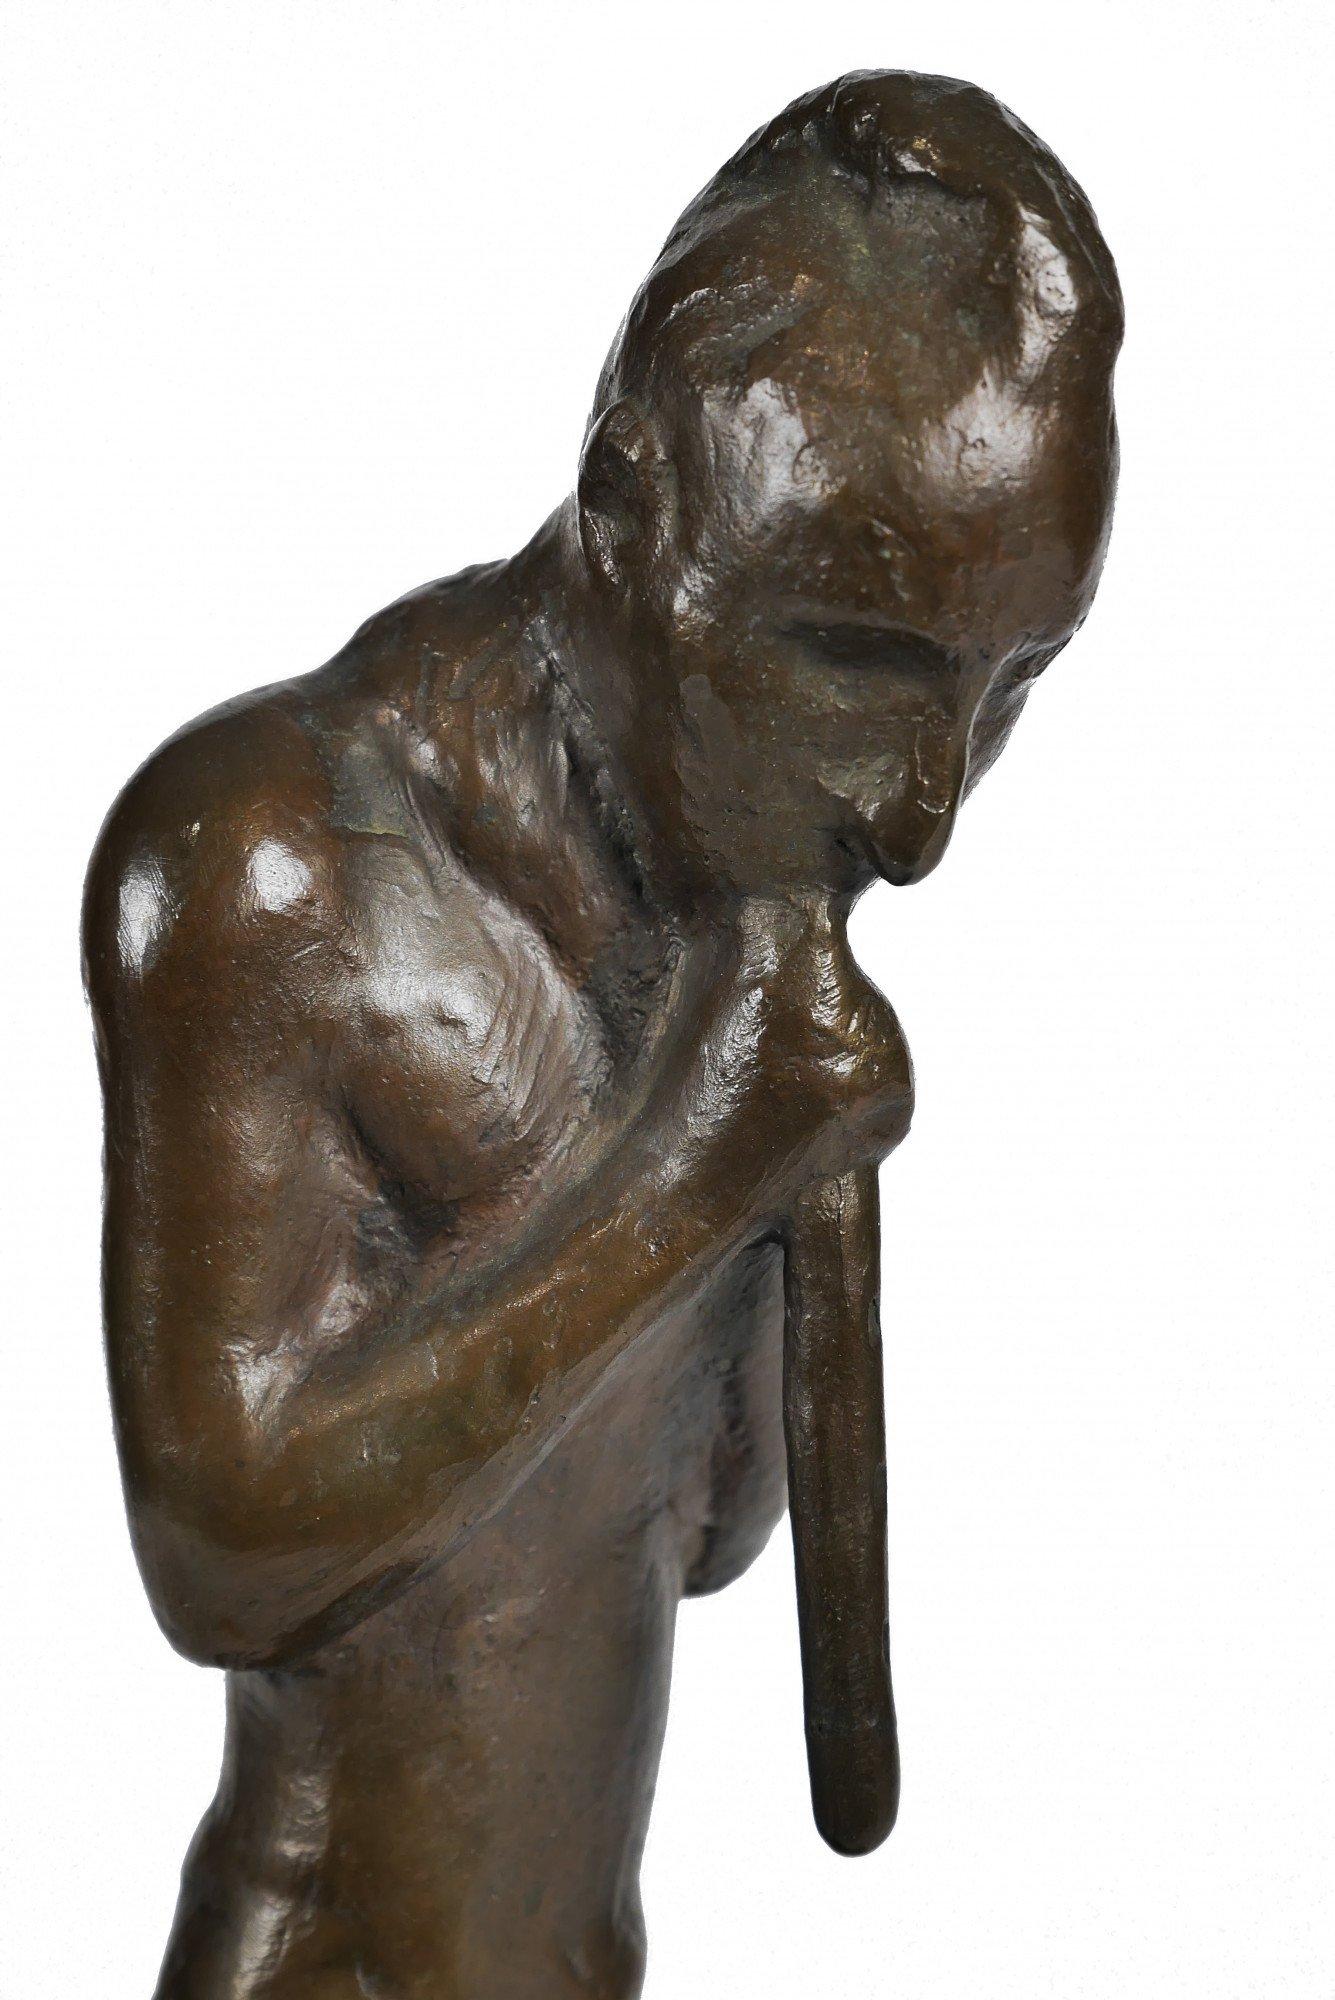 Man with Flute and Cougar, American 19th/20th century bronze w/ marble base - Sculpture by Edwin Willard Deming